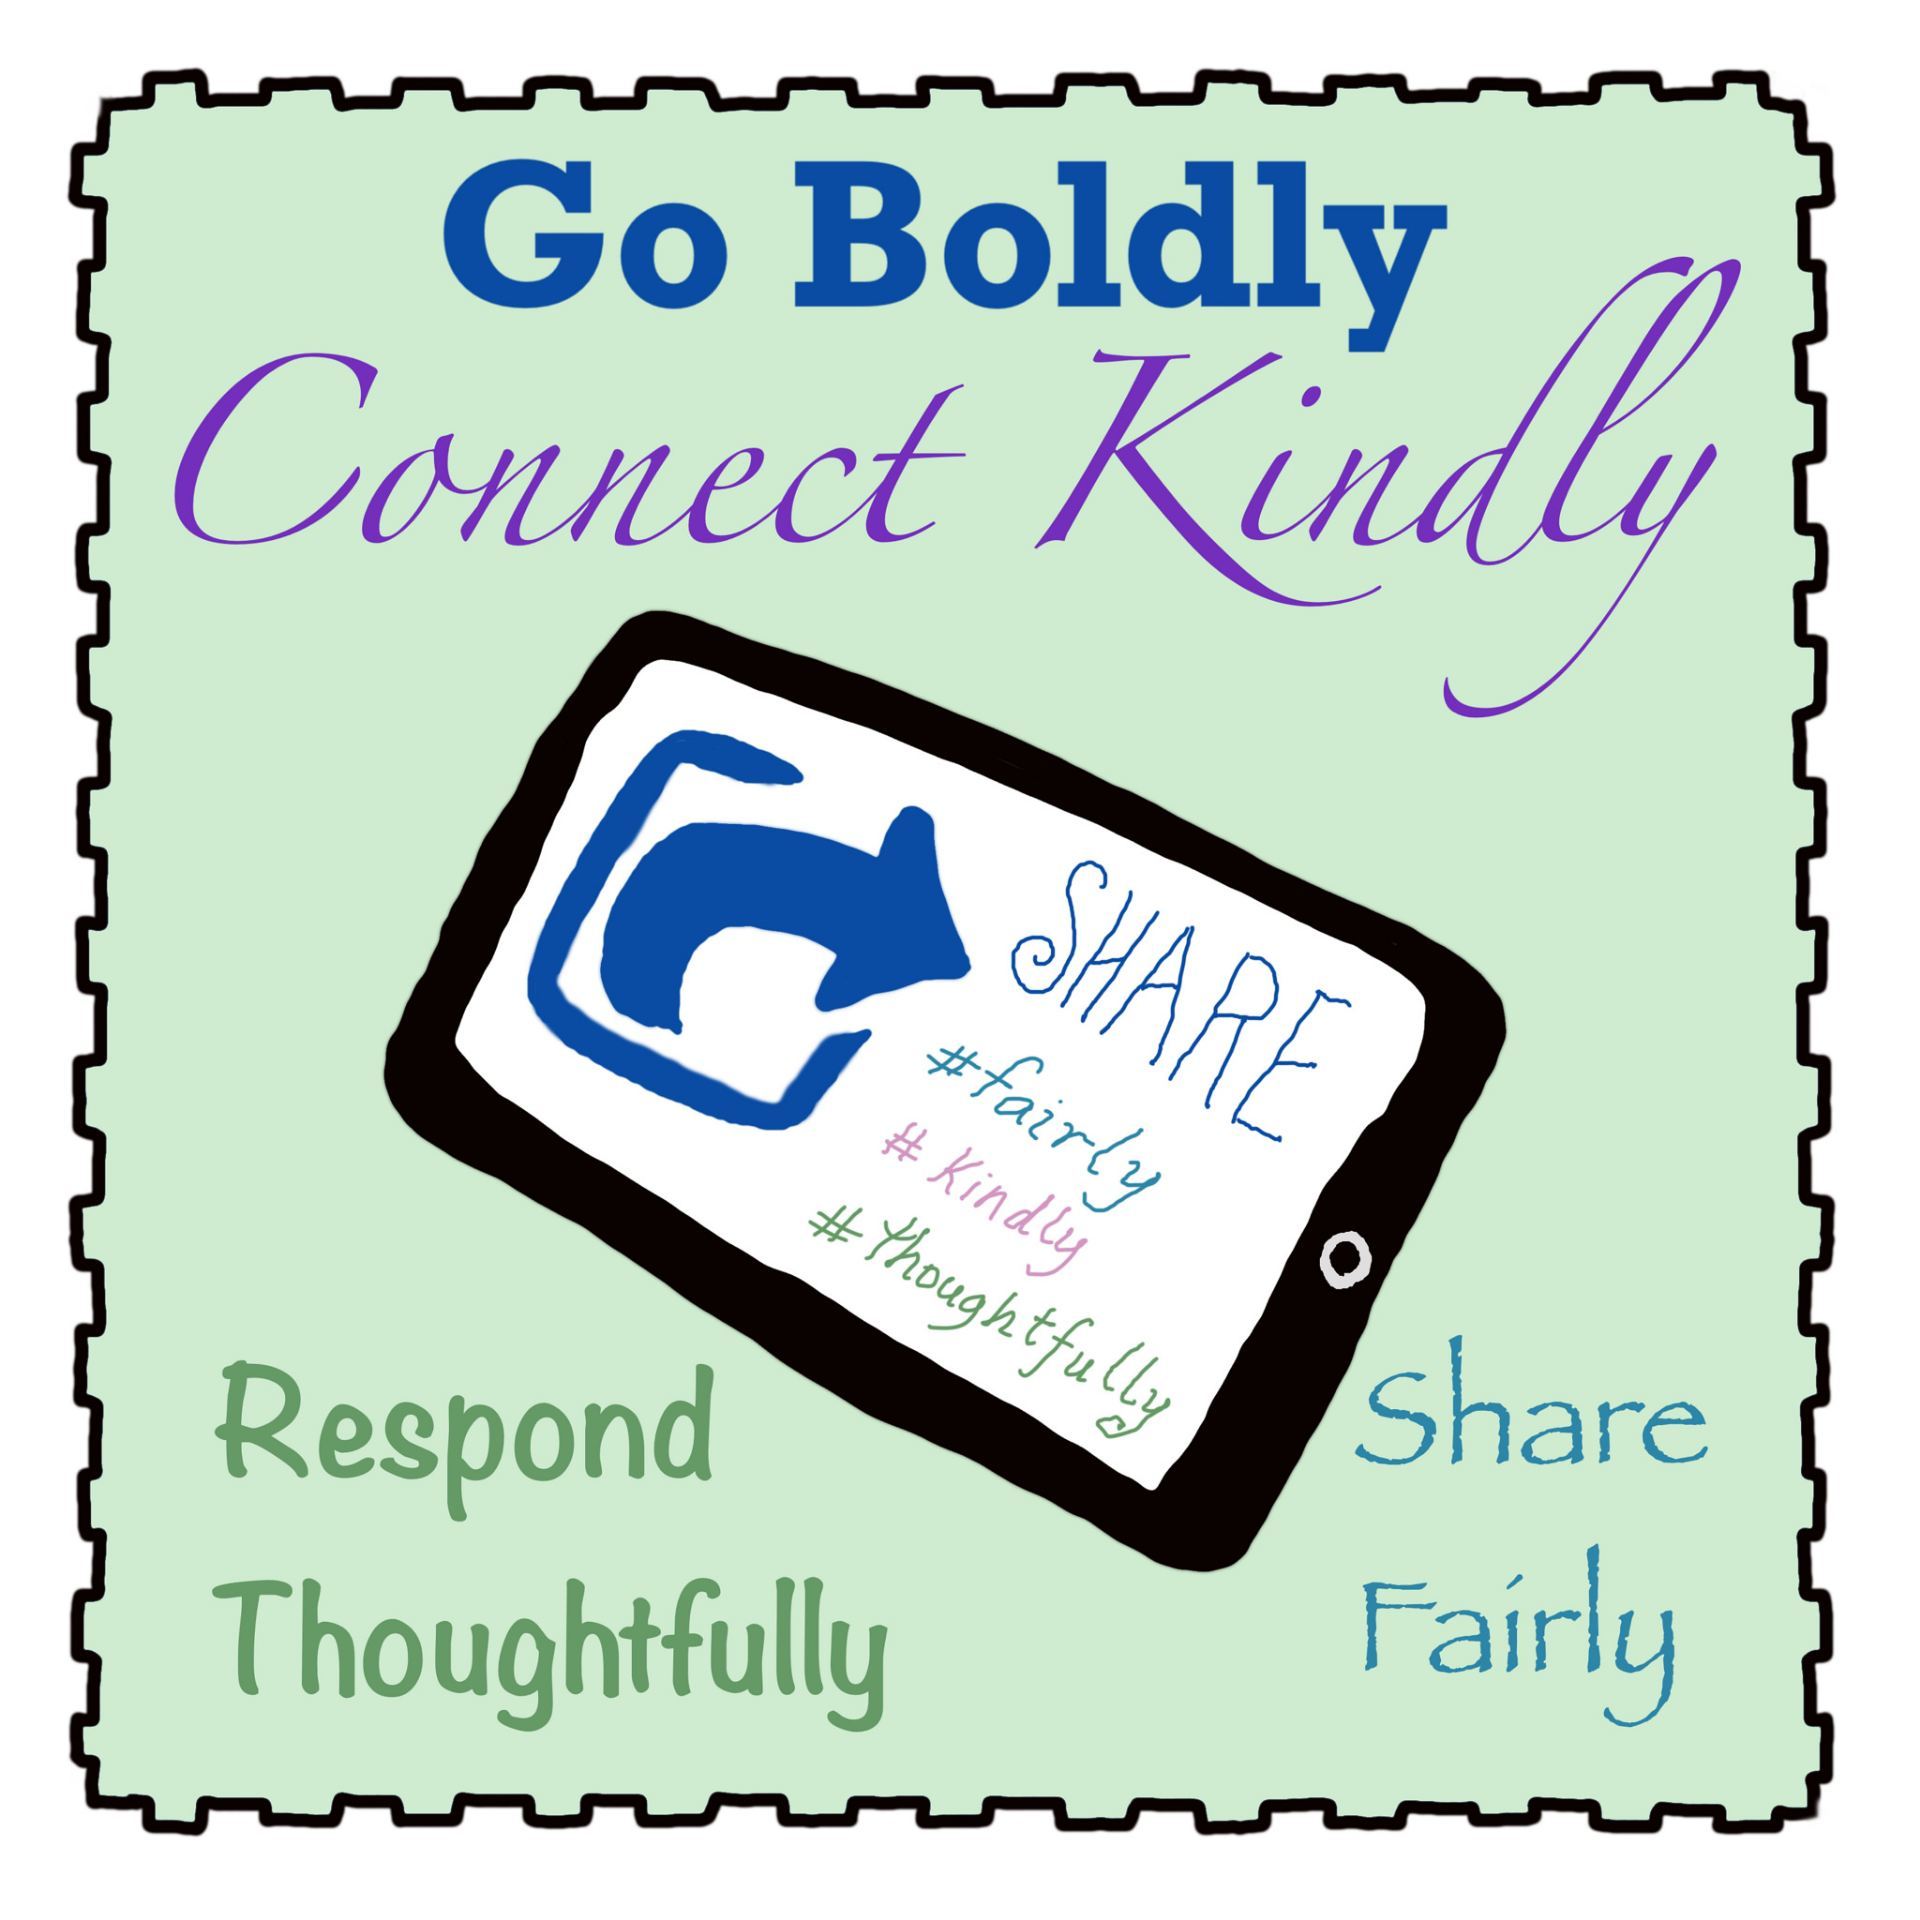 Go Boldly, Connect Kindly, Respond Thoughtfully, Share Fairly